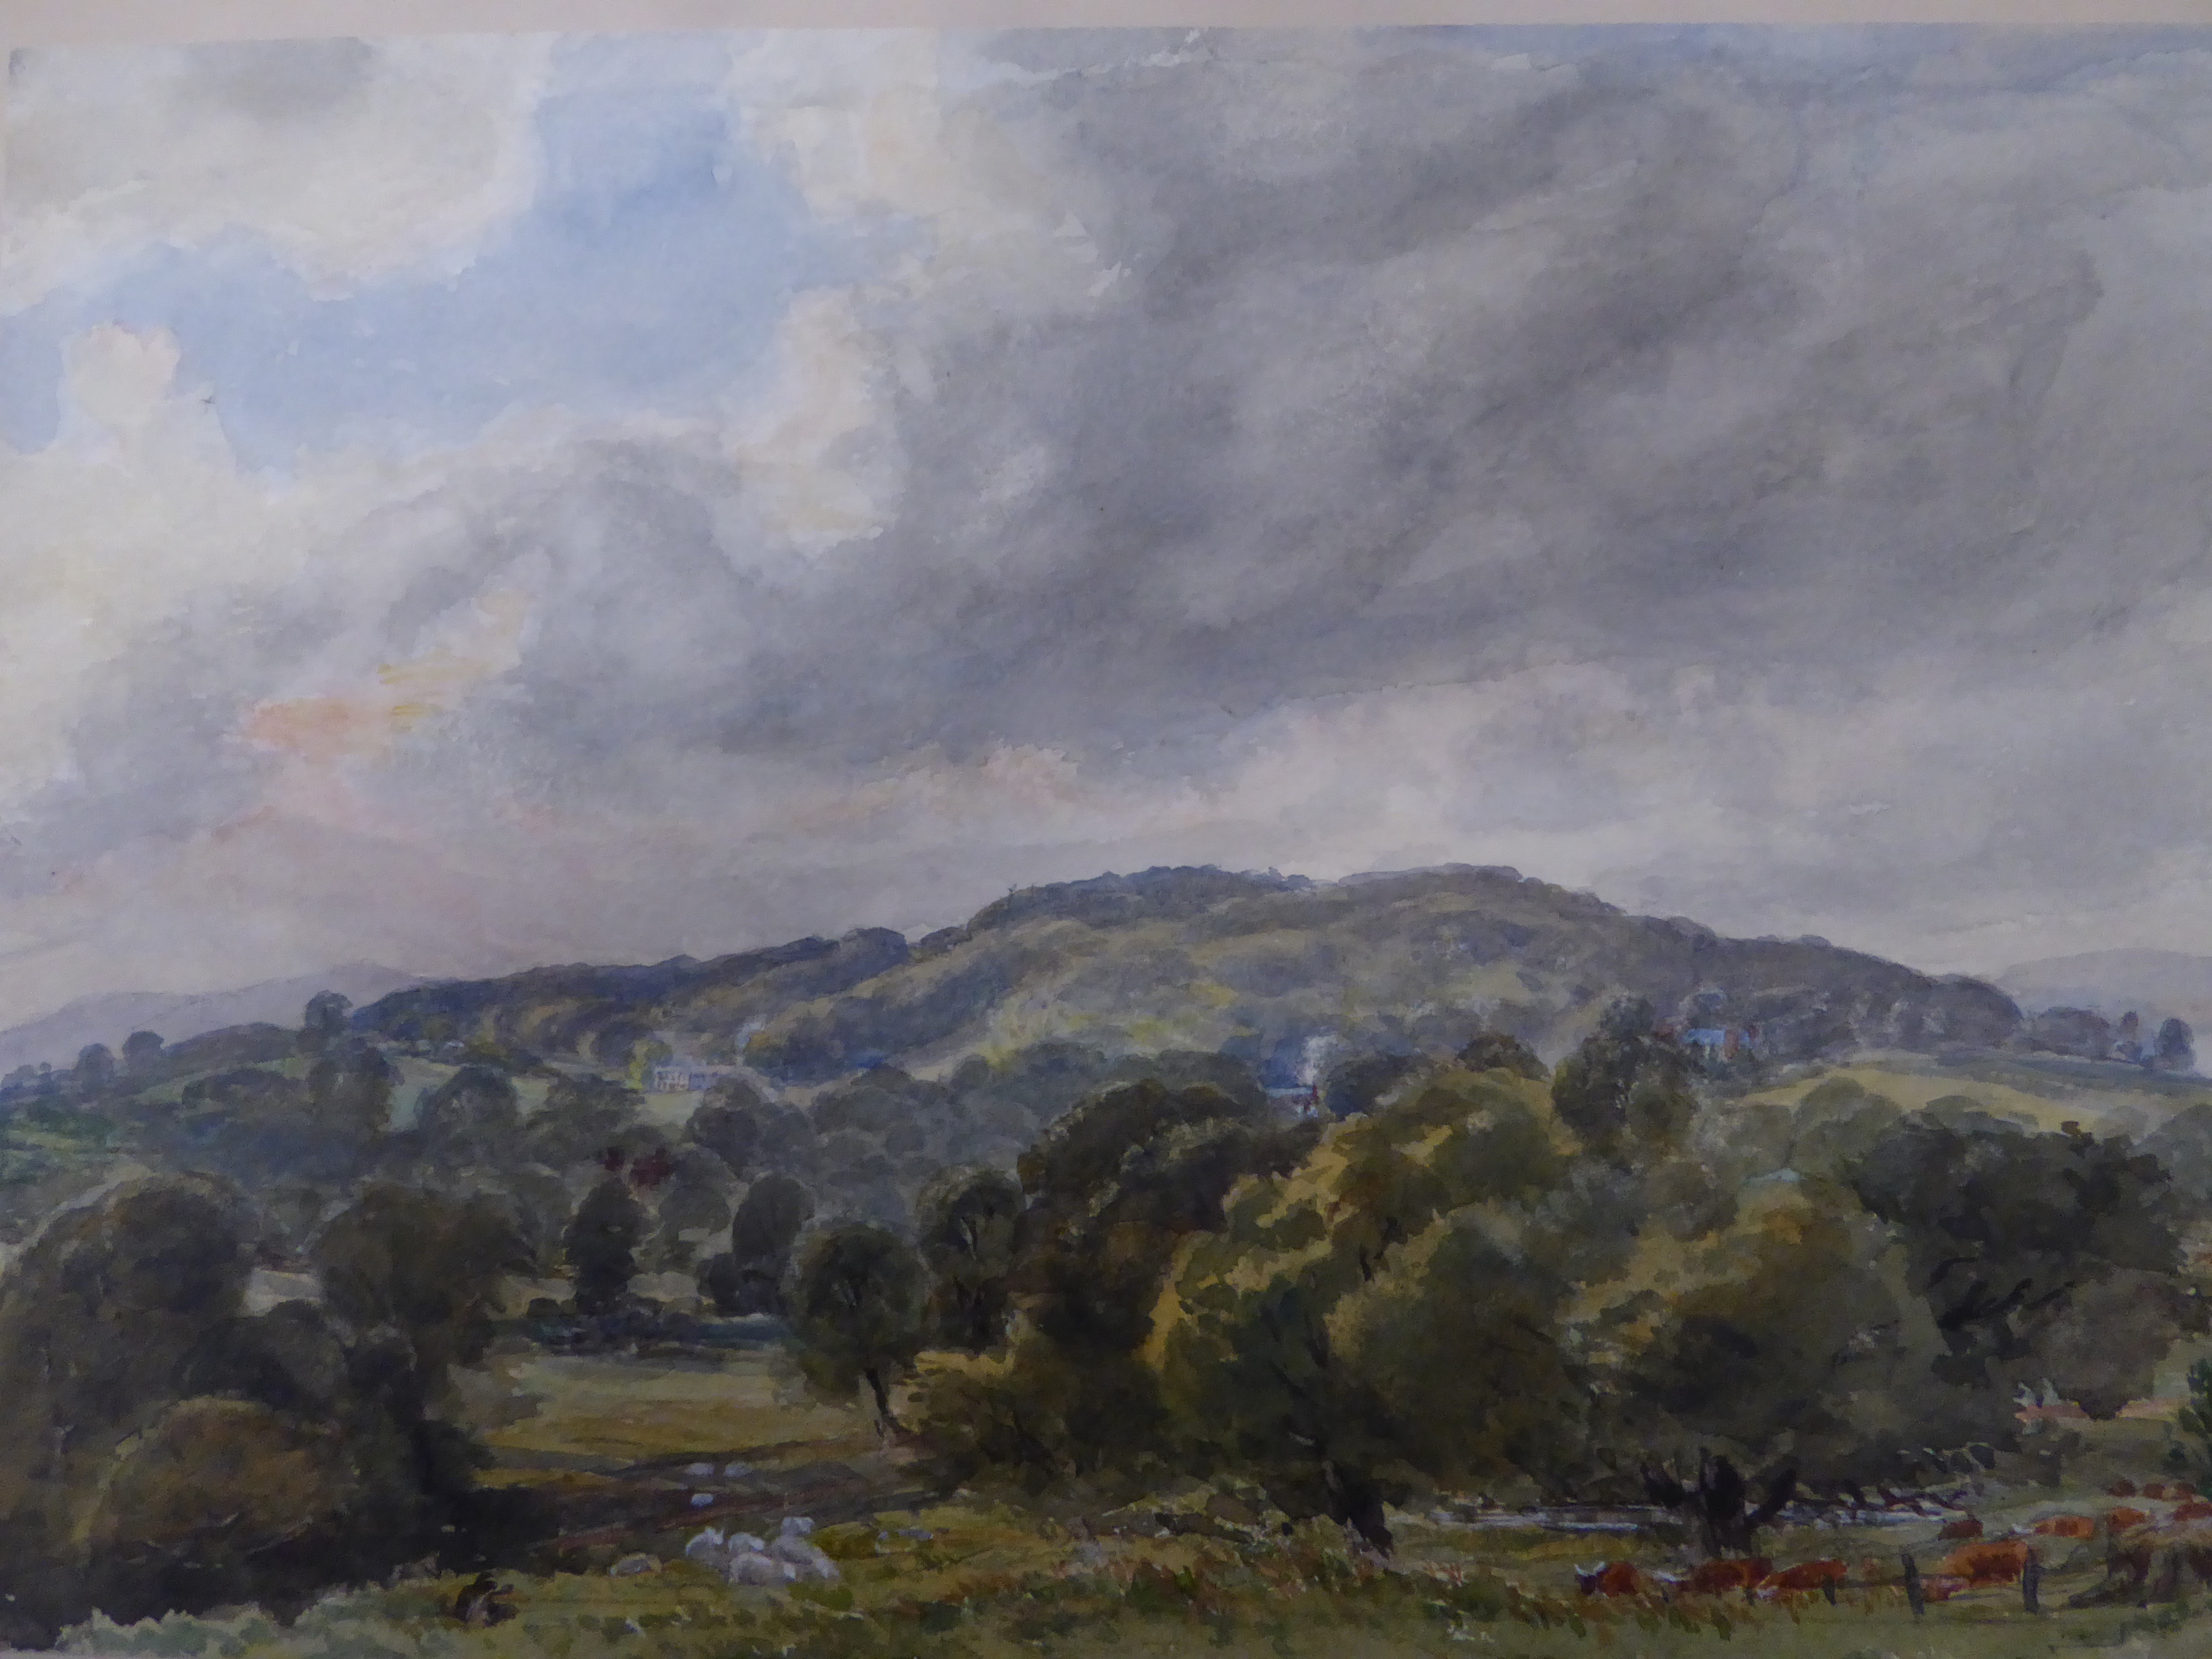 The project has been inspired by the watercolourr of the estate by Sir Thomas Acland (Fi Hailstone/National Trust/PA).